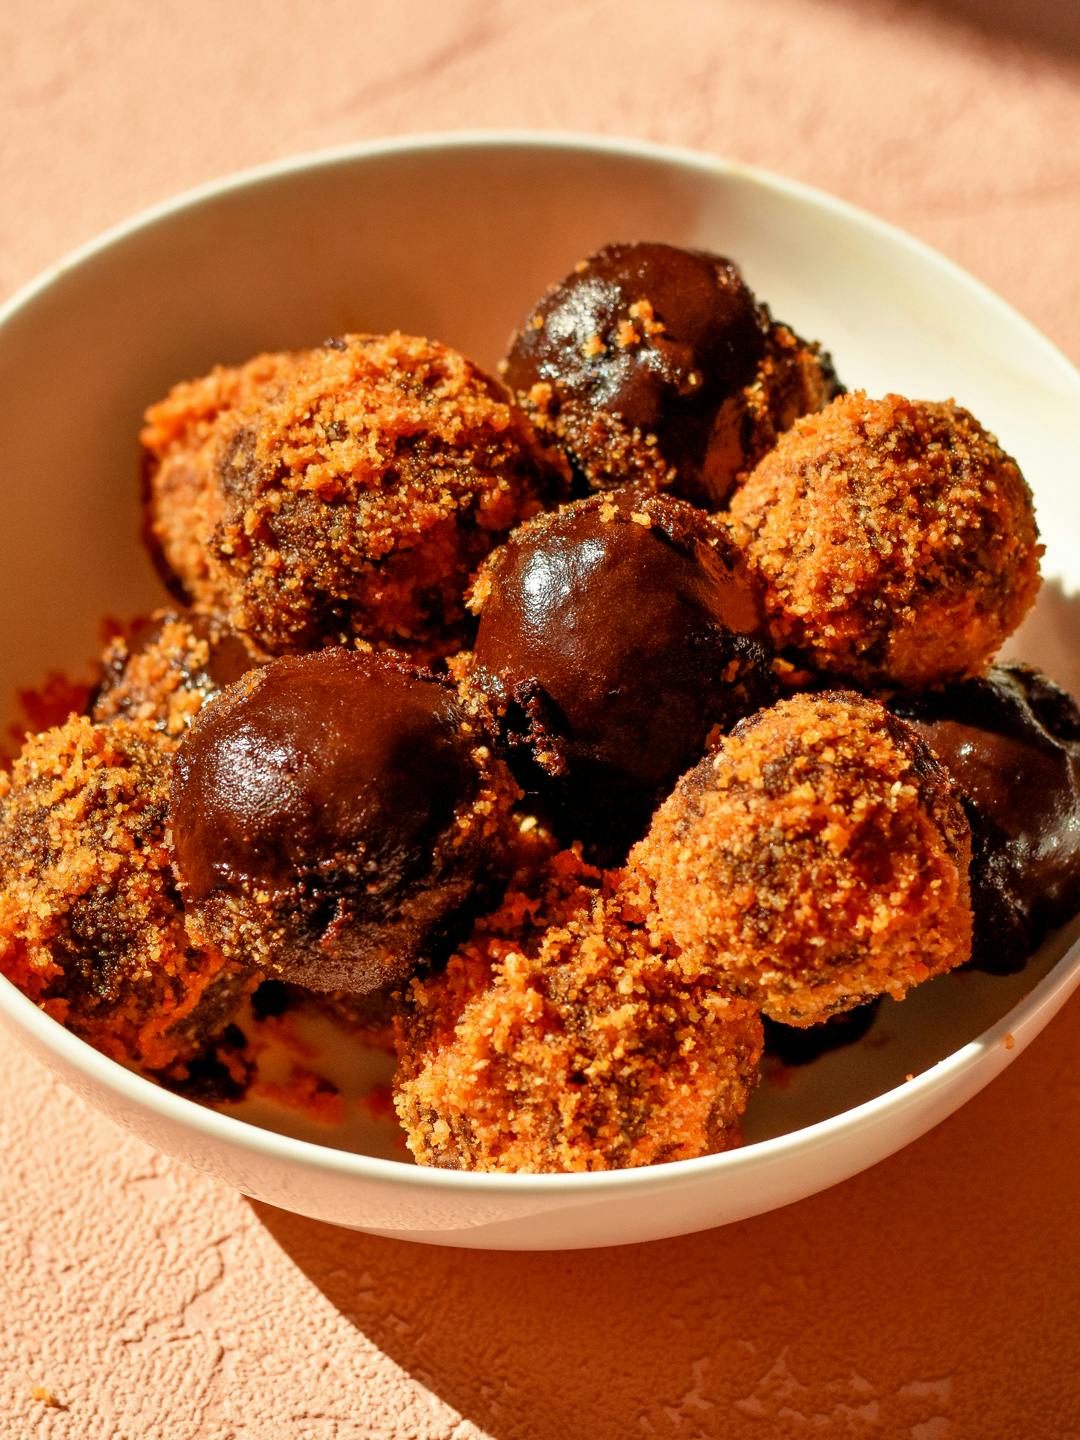 Vegan dunkin' donuts munchkins, with chocolate coating and butternut topping, in a bowl